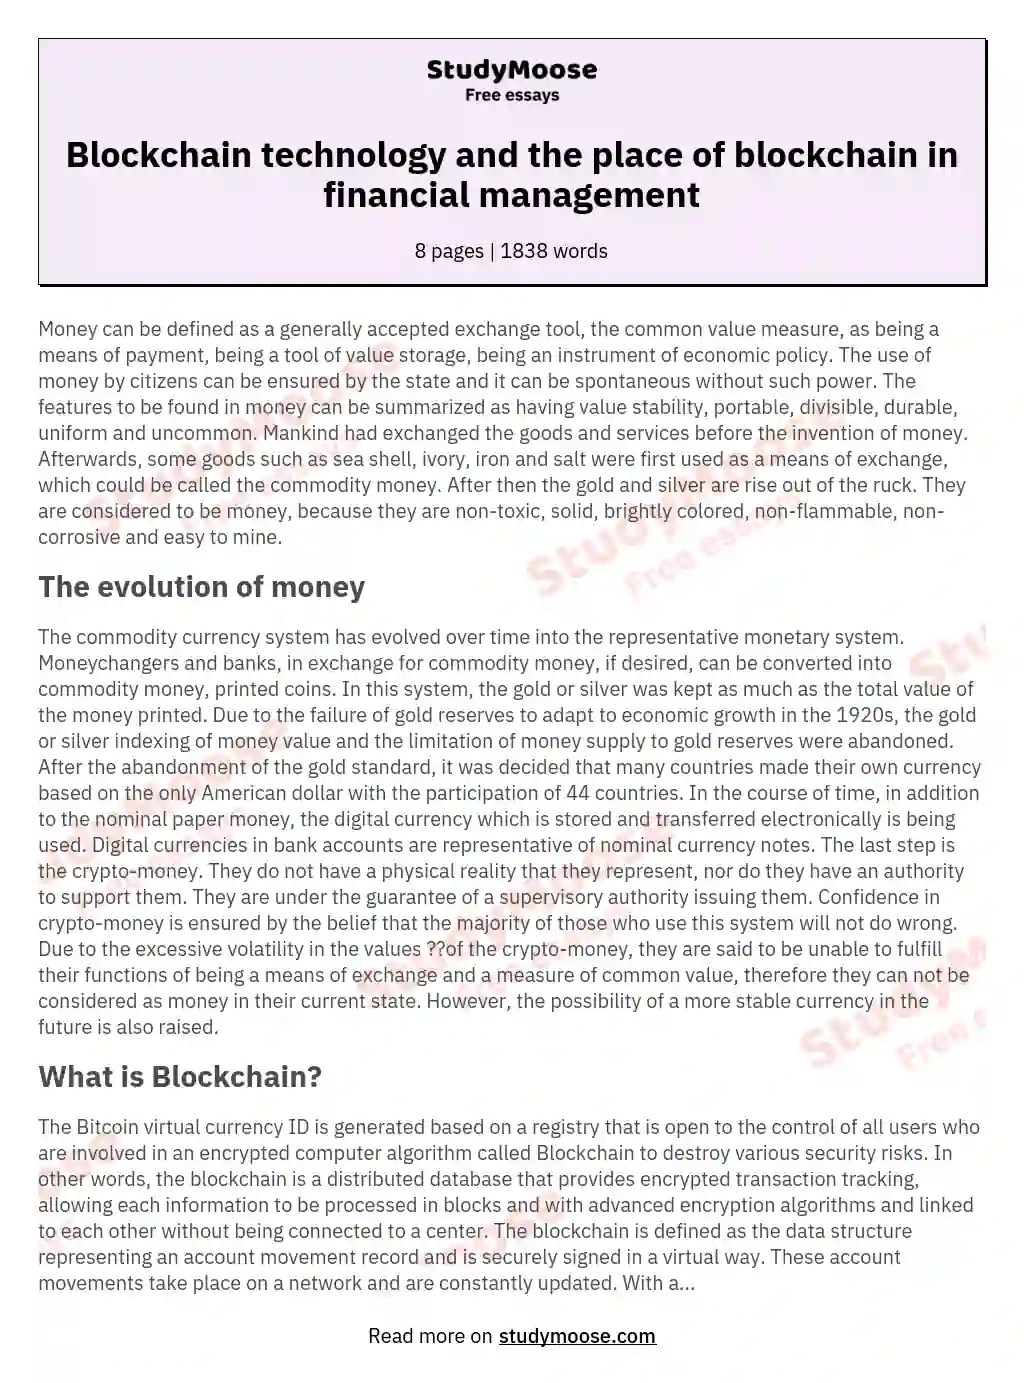 Blockchain technology and the place of blockchain in financial management